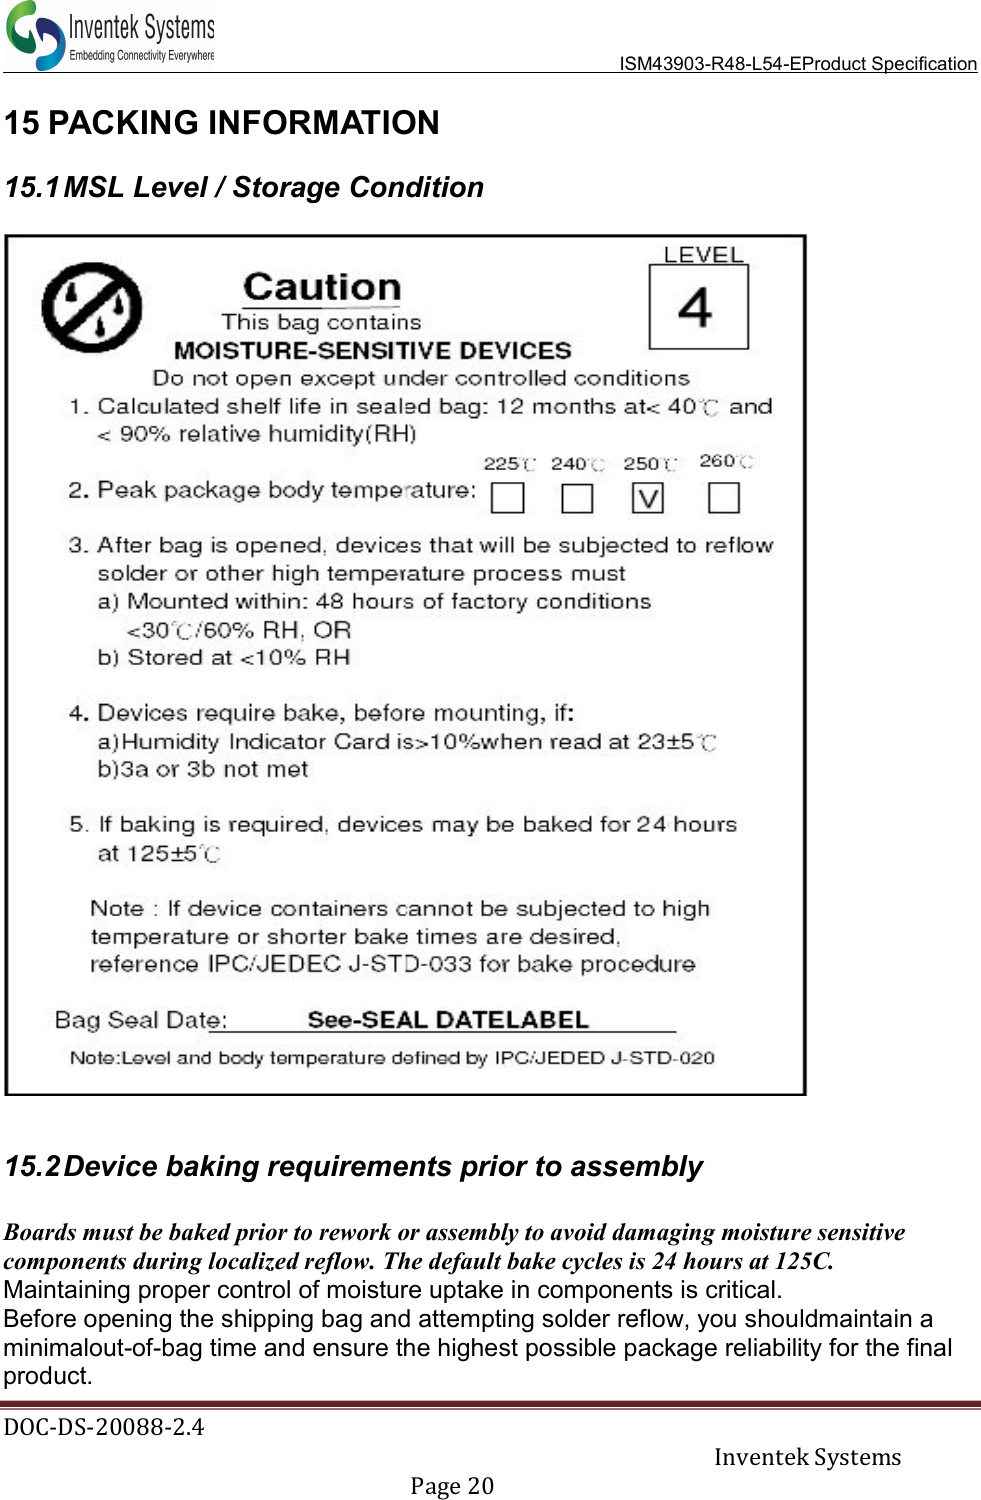   ISM43903-R48-L54-EProduct Specification DOC-DS-20088-2.4     Inventek Systems   Page 20  15 PACKING INFORMATION  15.1 MSL Level / Storage Condition    15.2 Device baking requirements prior to assembly  Boards must be baked prior to rework or assembly to avoid damaging moisture sensitive components during localized reflow. The default bake cycles is 24 hours at 125C.  Maintaining proper control of moisture uptake in components is critical. Before opening the shipping bag and attempting solder reflow, you shouldmaintain a minimalout-of-bag time and ensure the highest possible package reliability for the final product. 